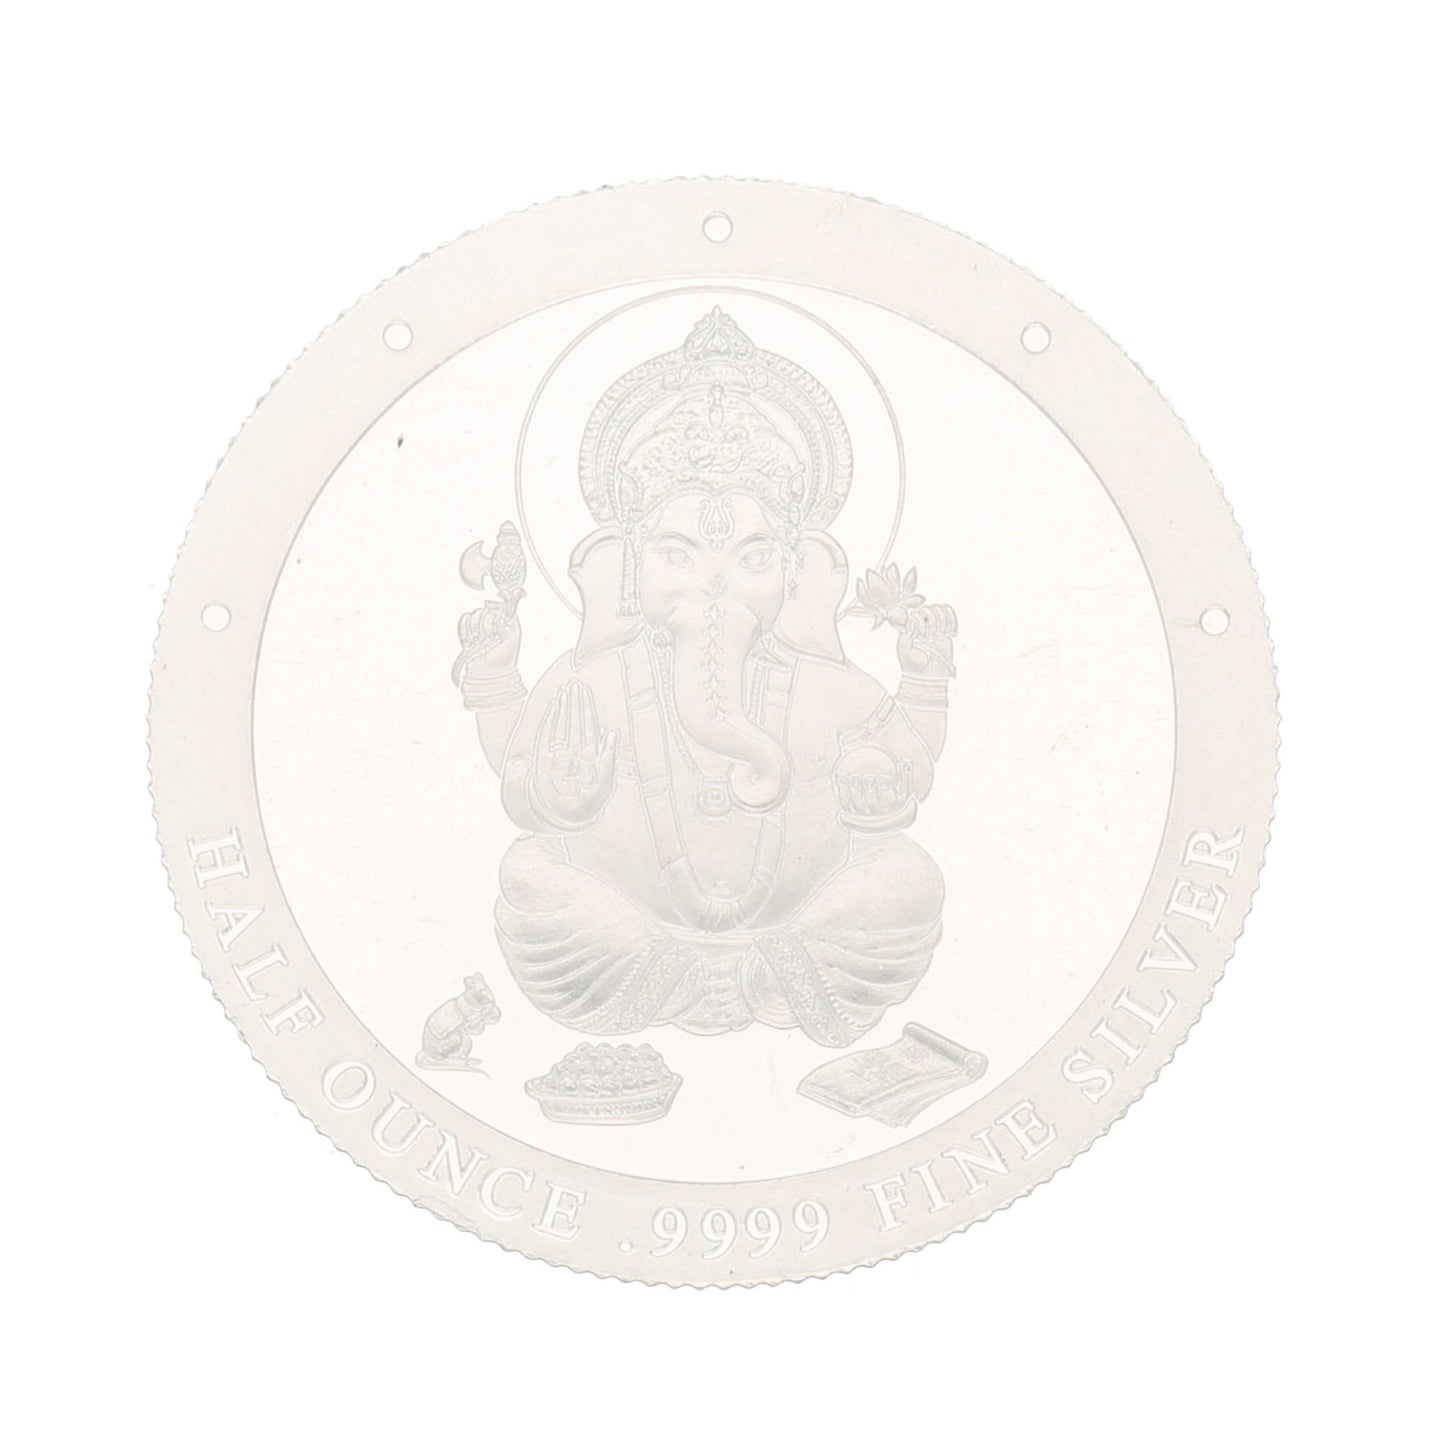 New Sterling Silver 1/2 Oz Ganesh Coin